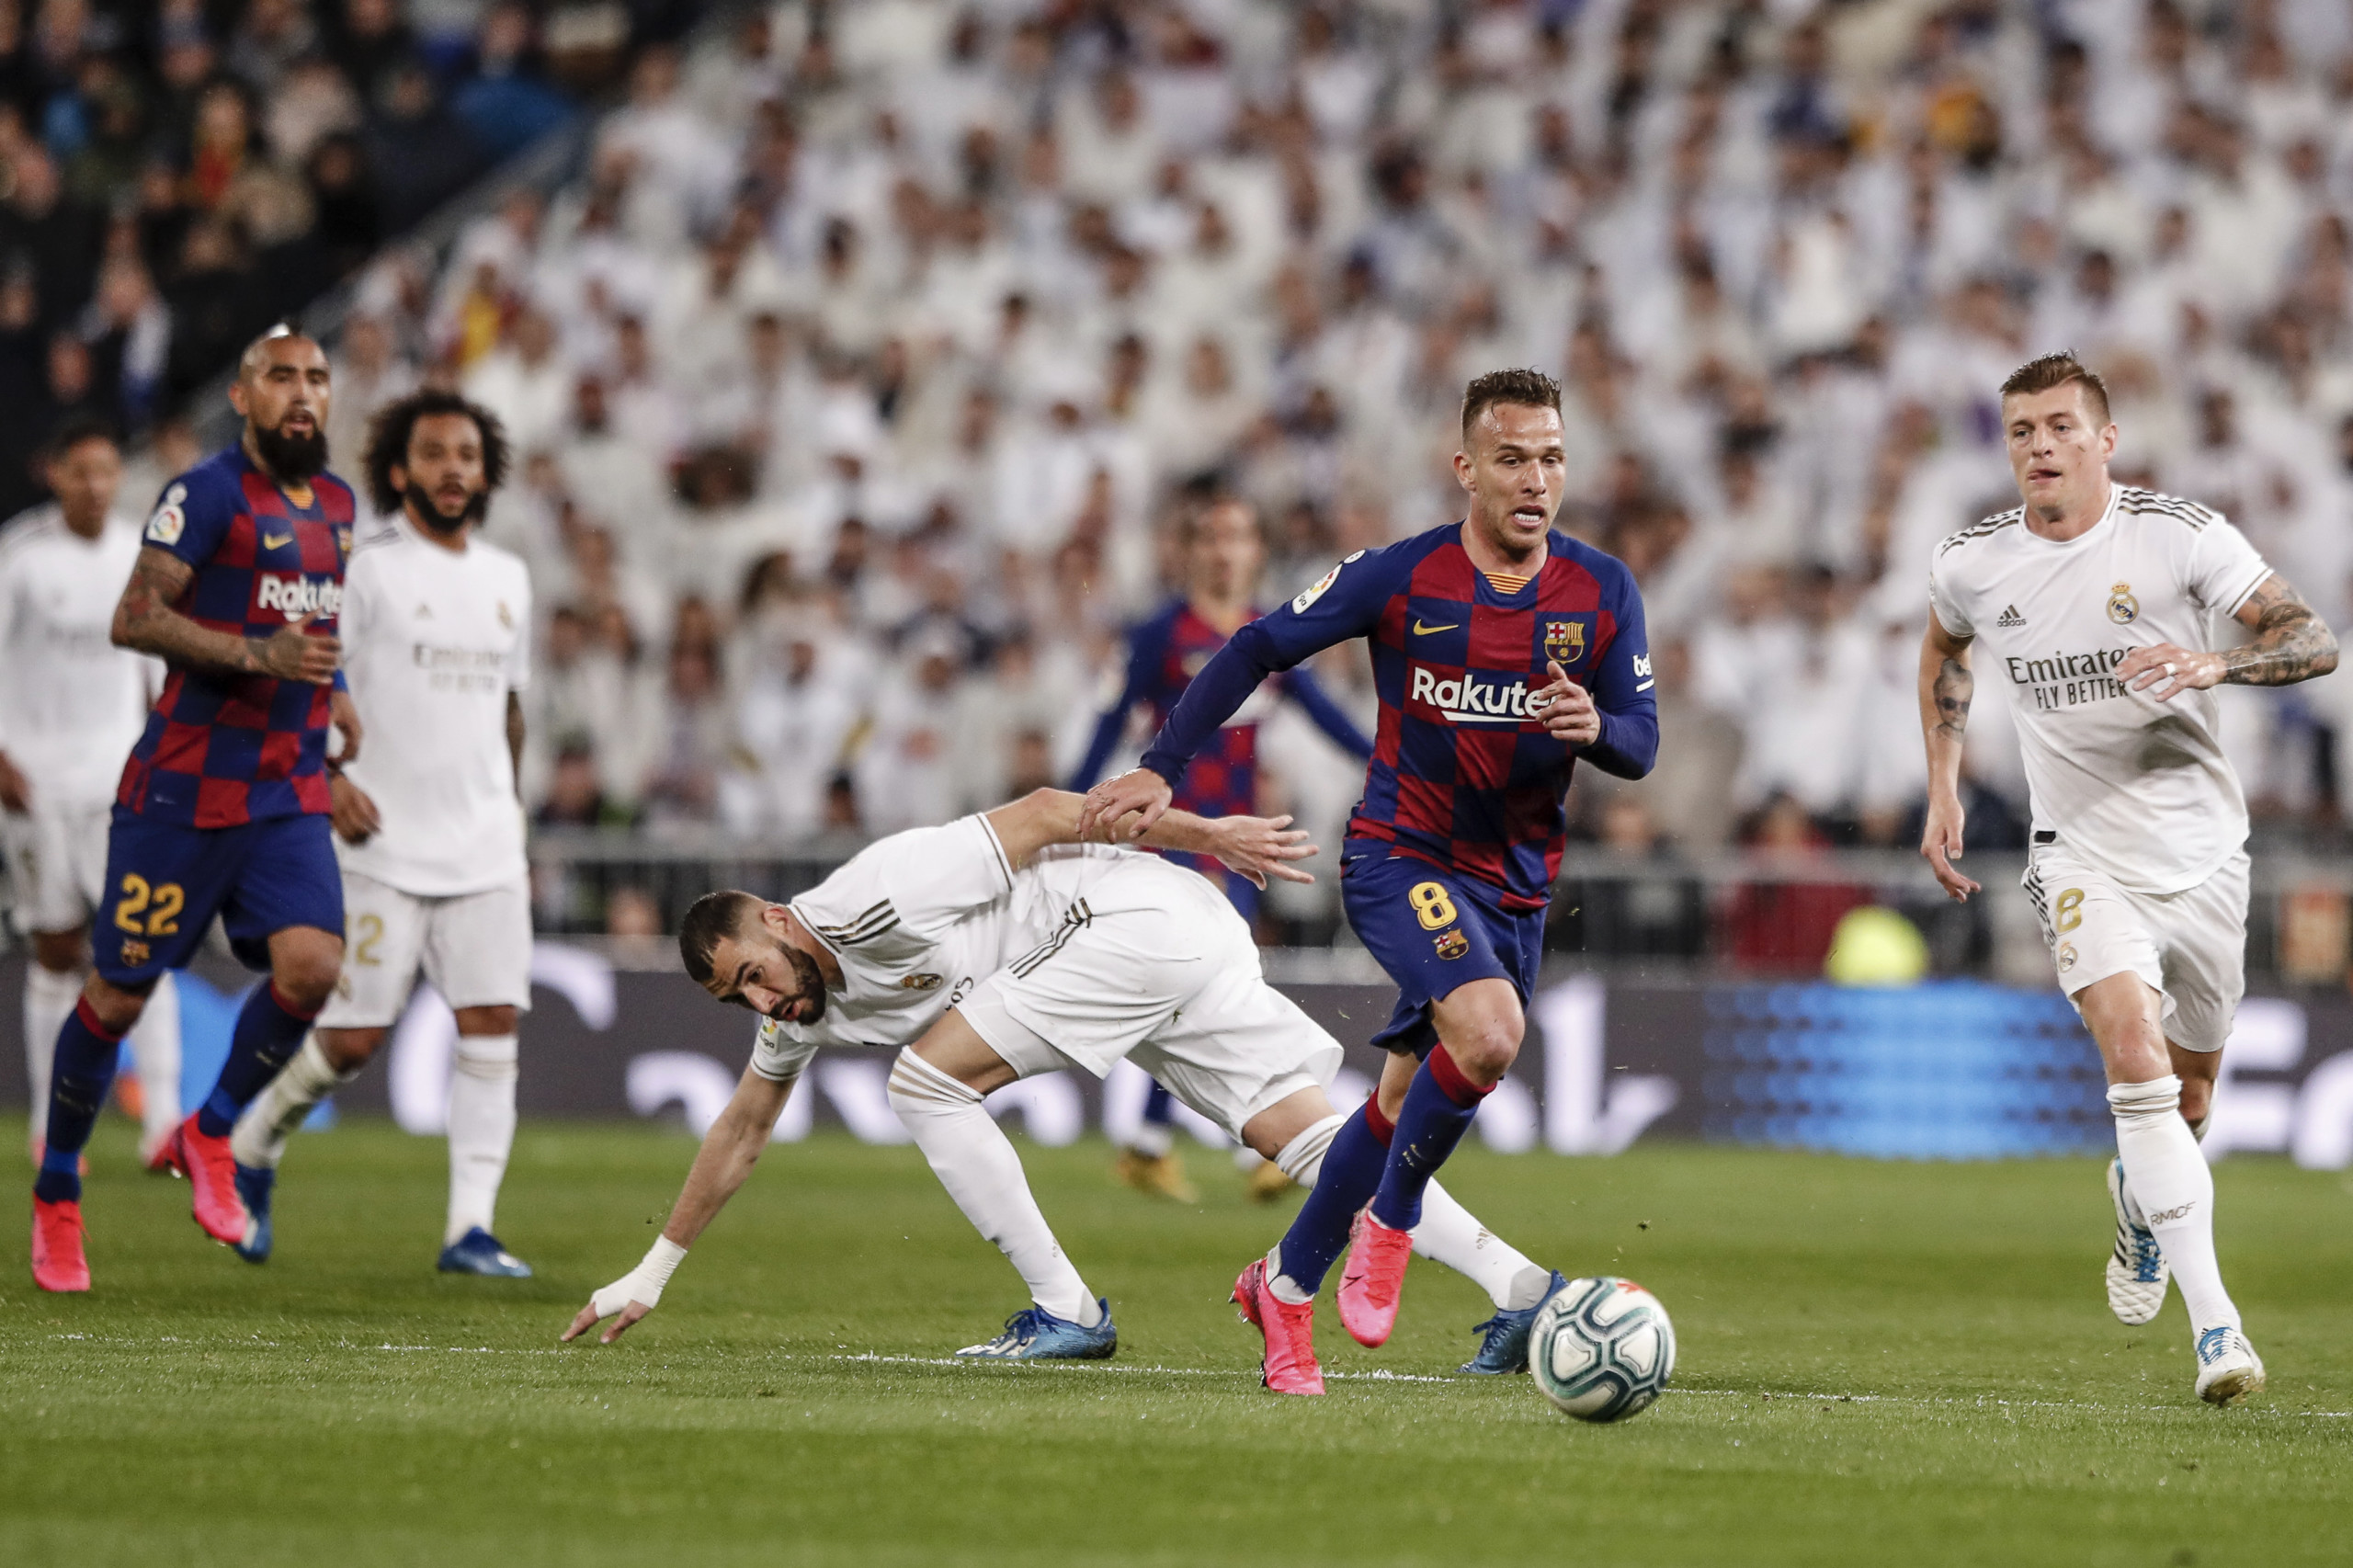 La Liga Roundup: Arthur Departs and Results Catch Up With Celades